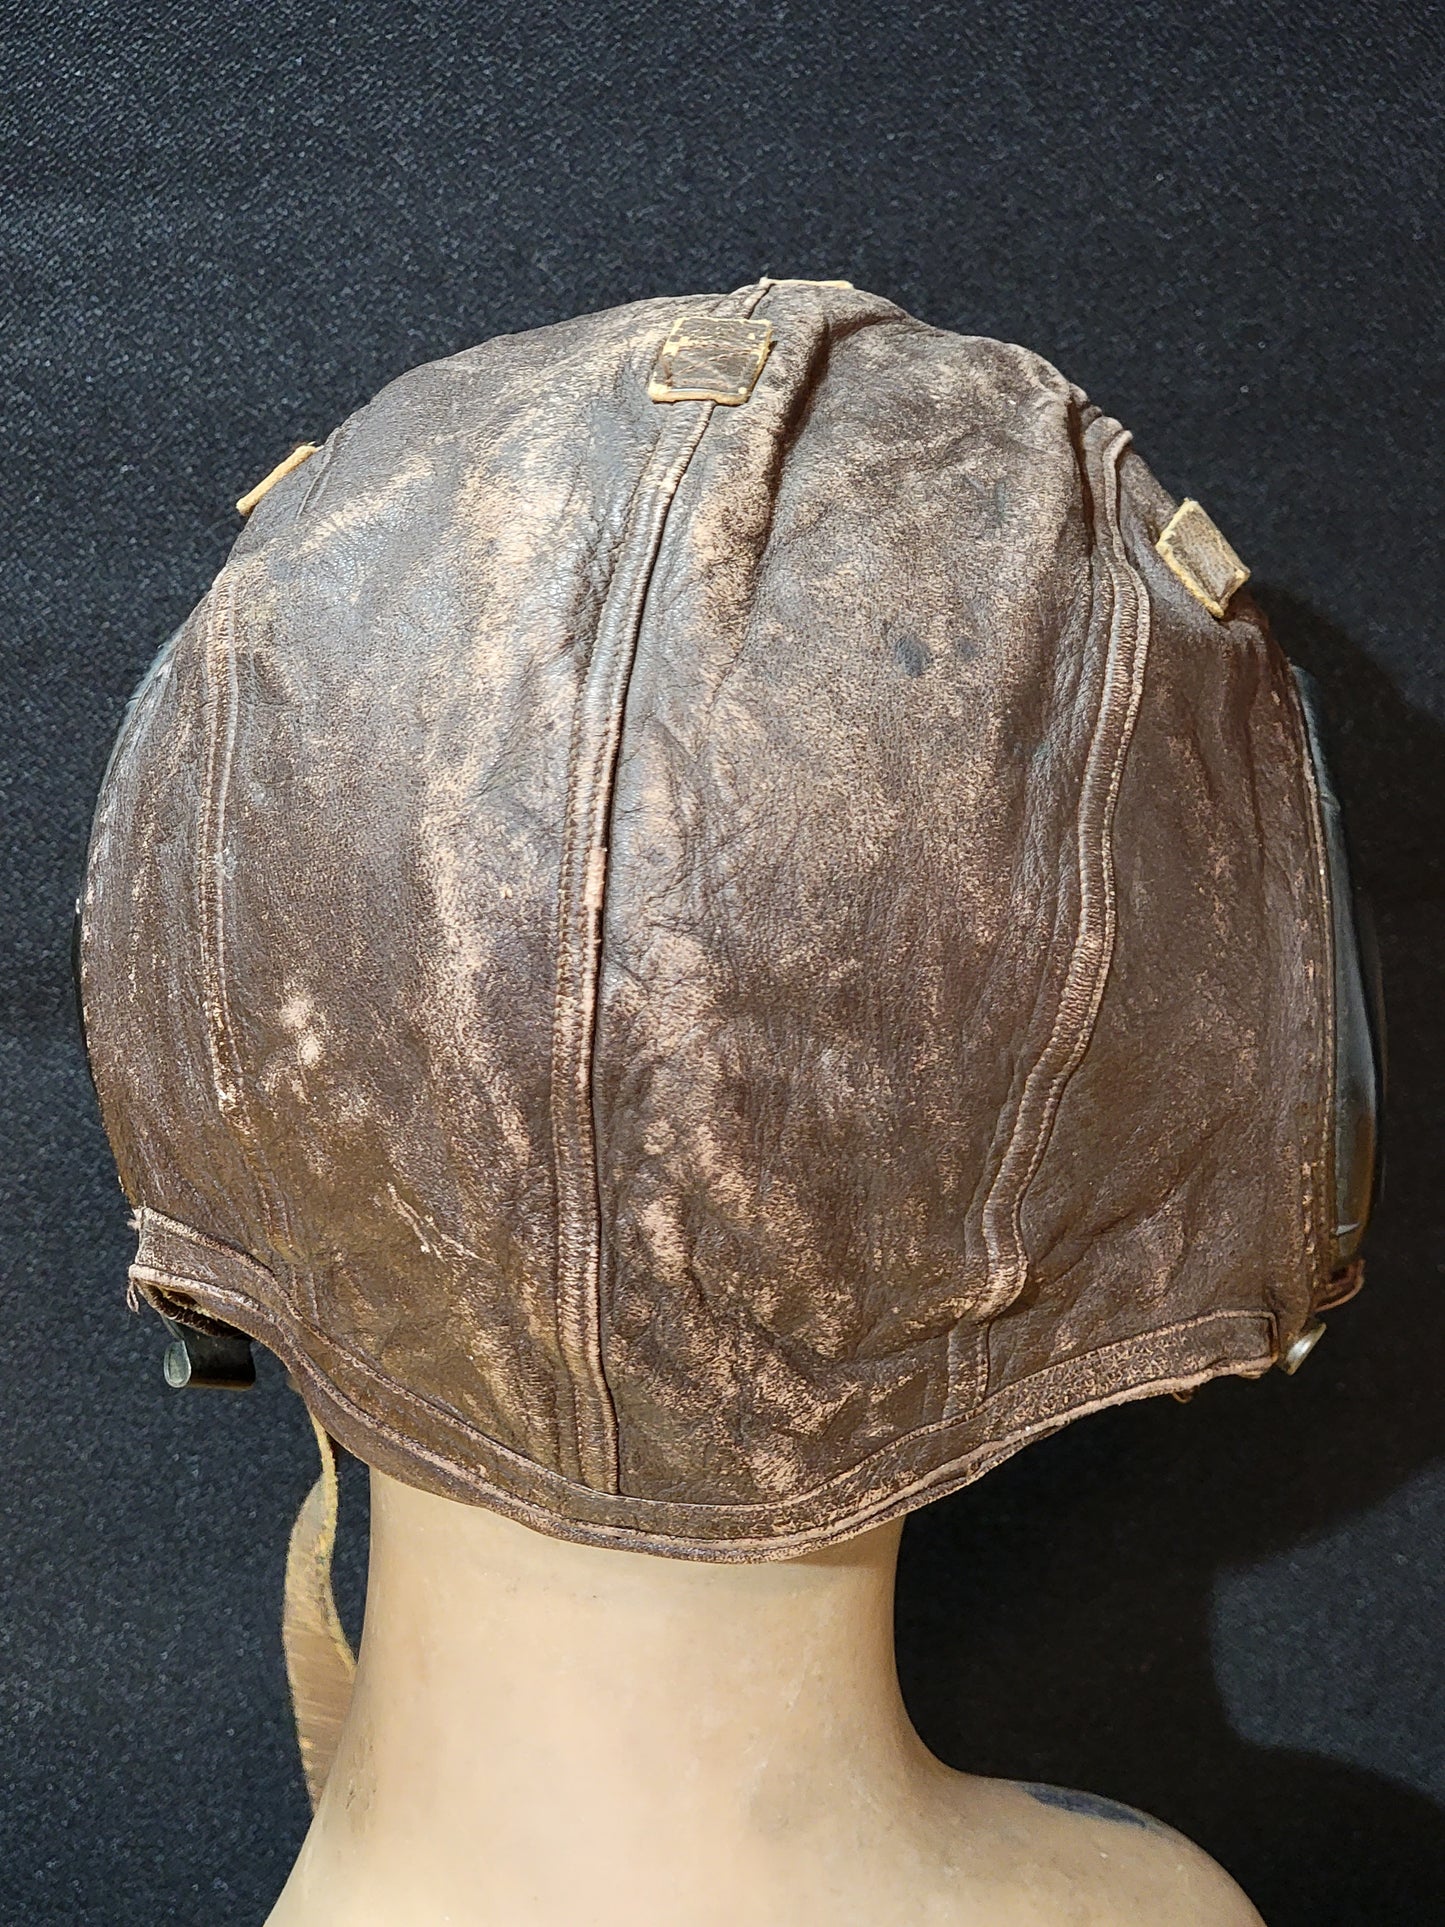 WWII Pilot Helmet Airforce Type A-11